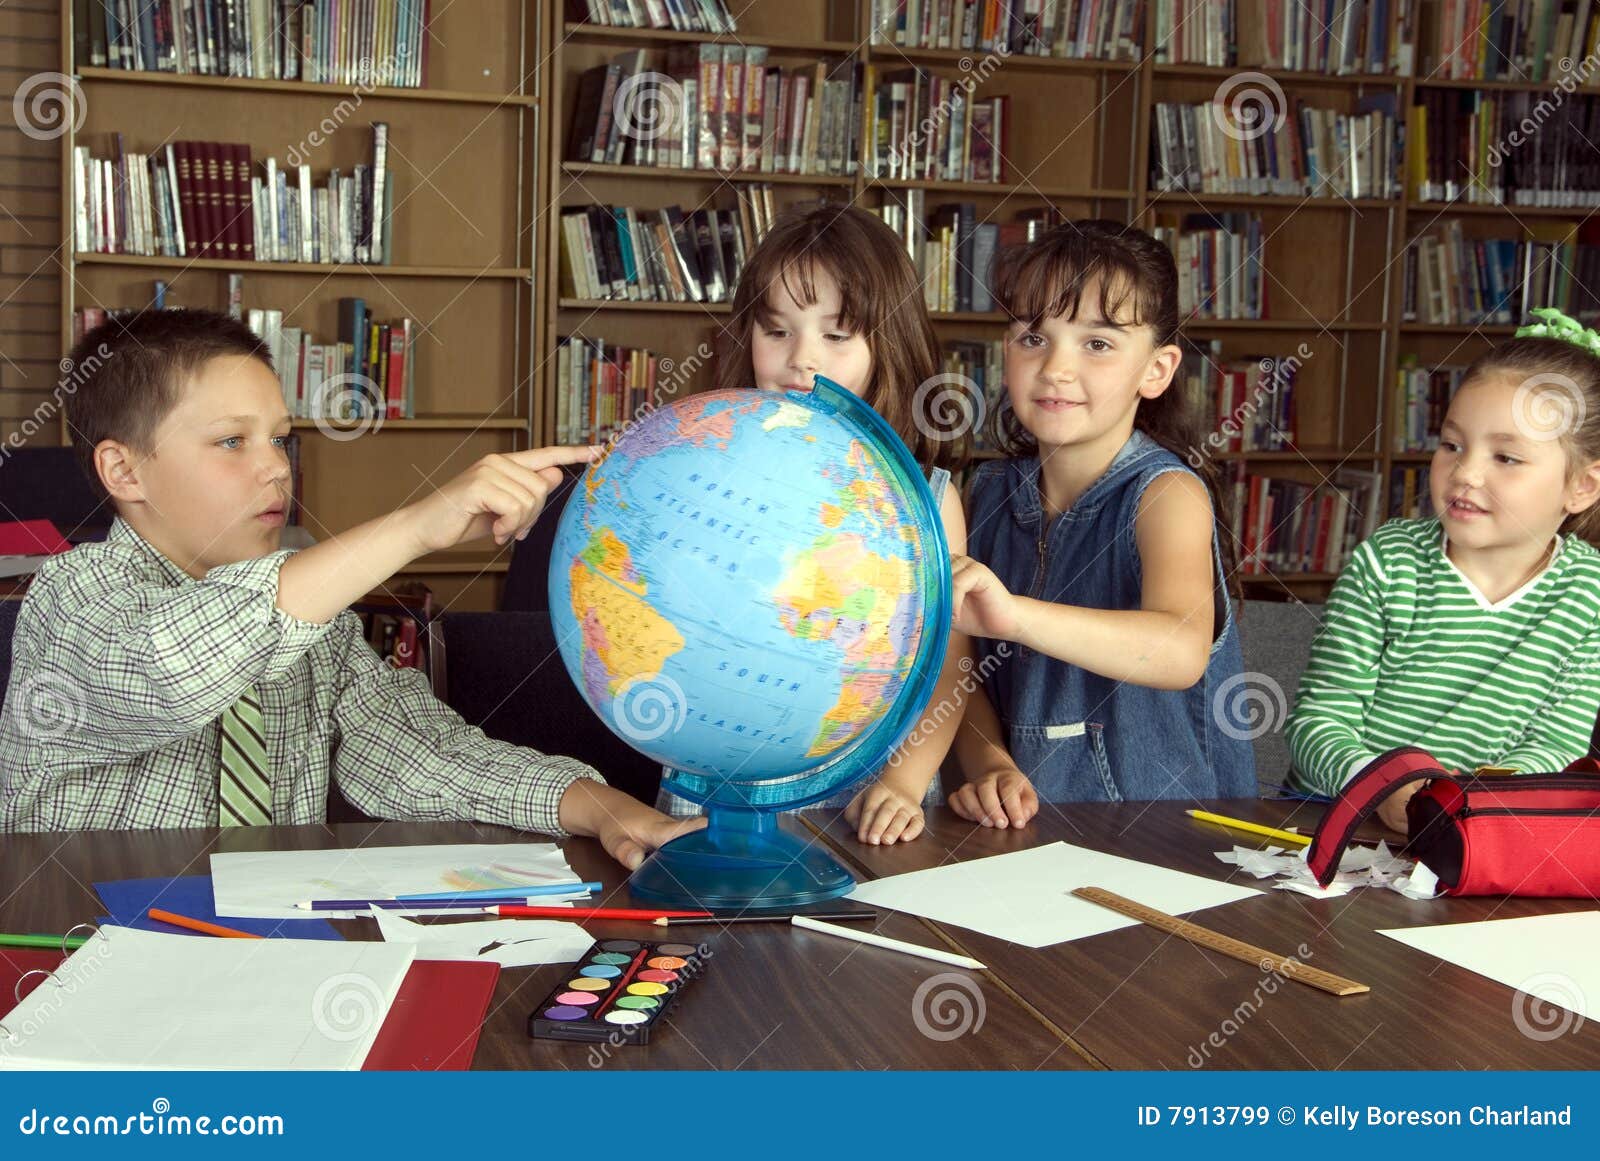 ary school students studying